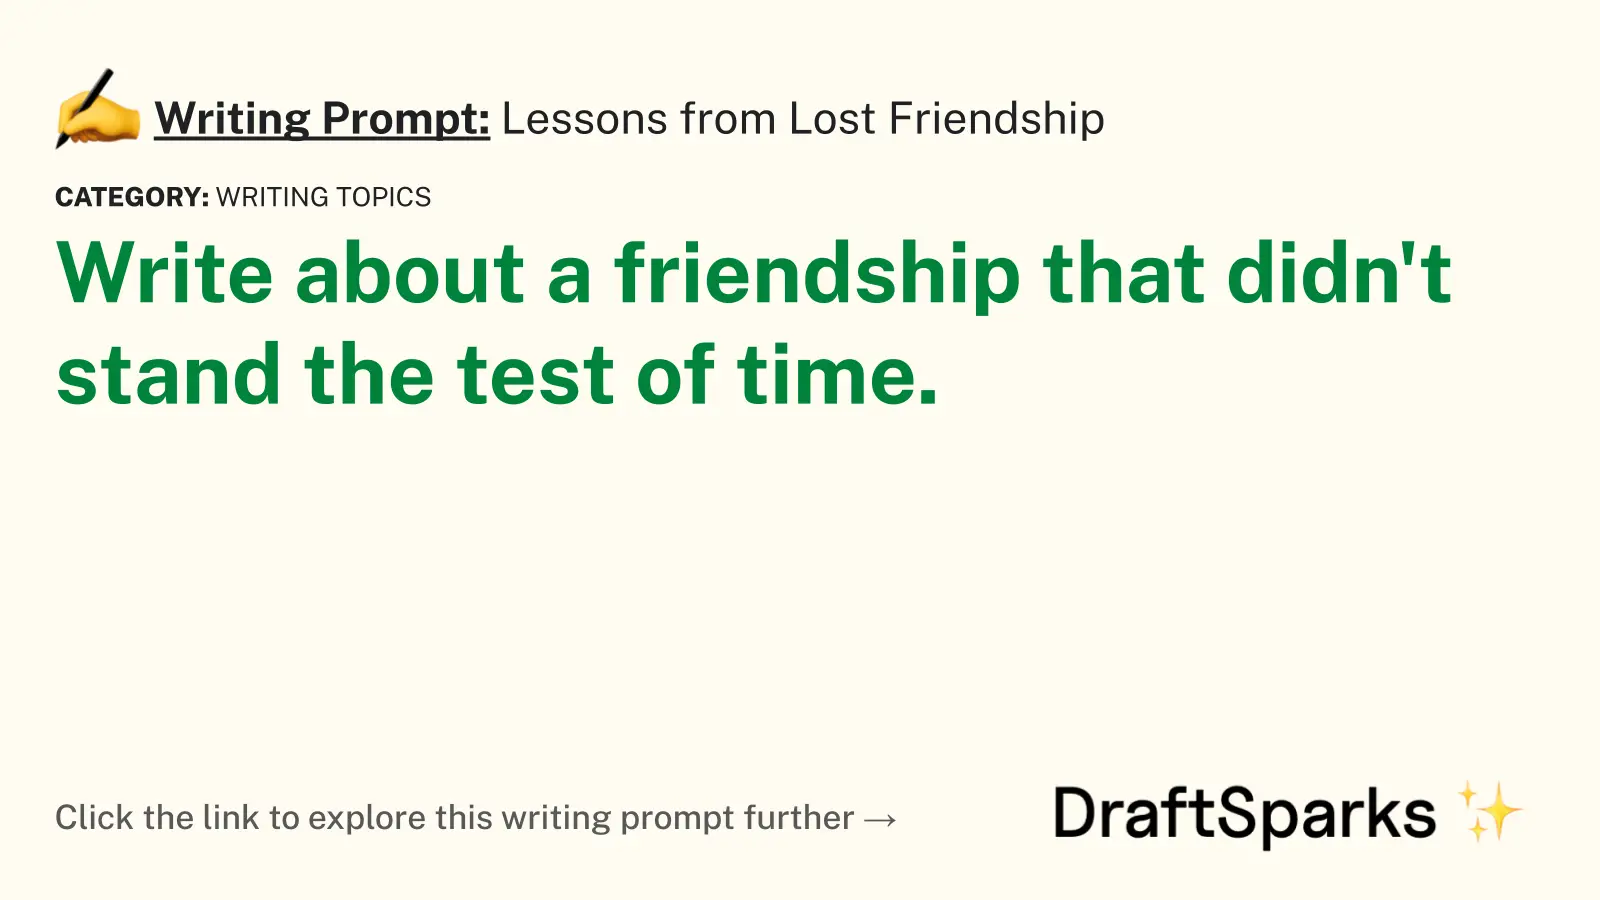 Lessons from Lost Friendship